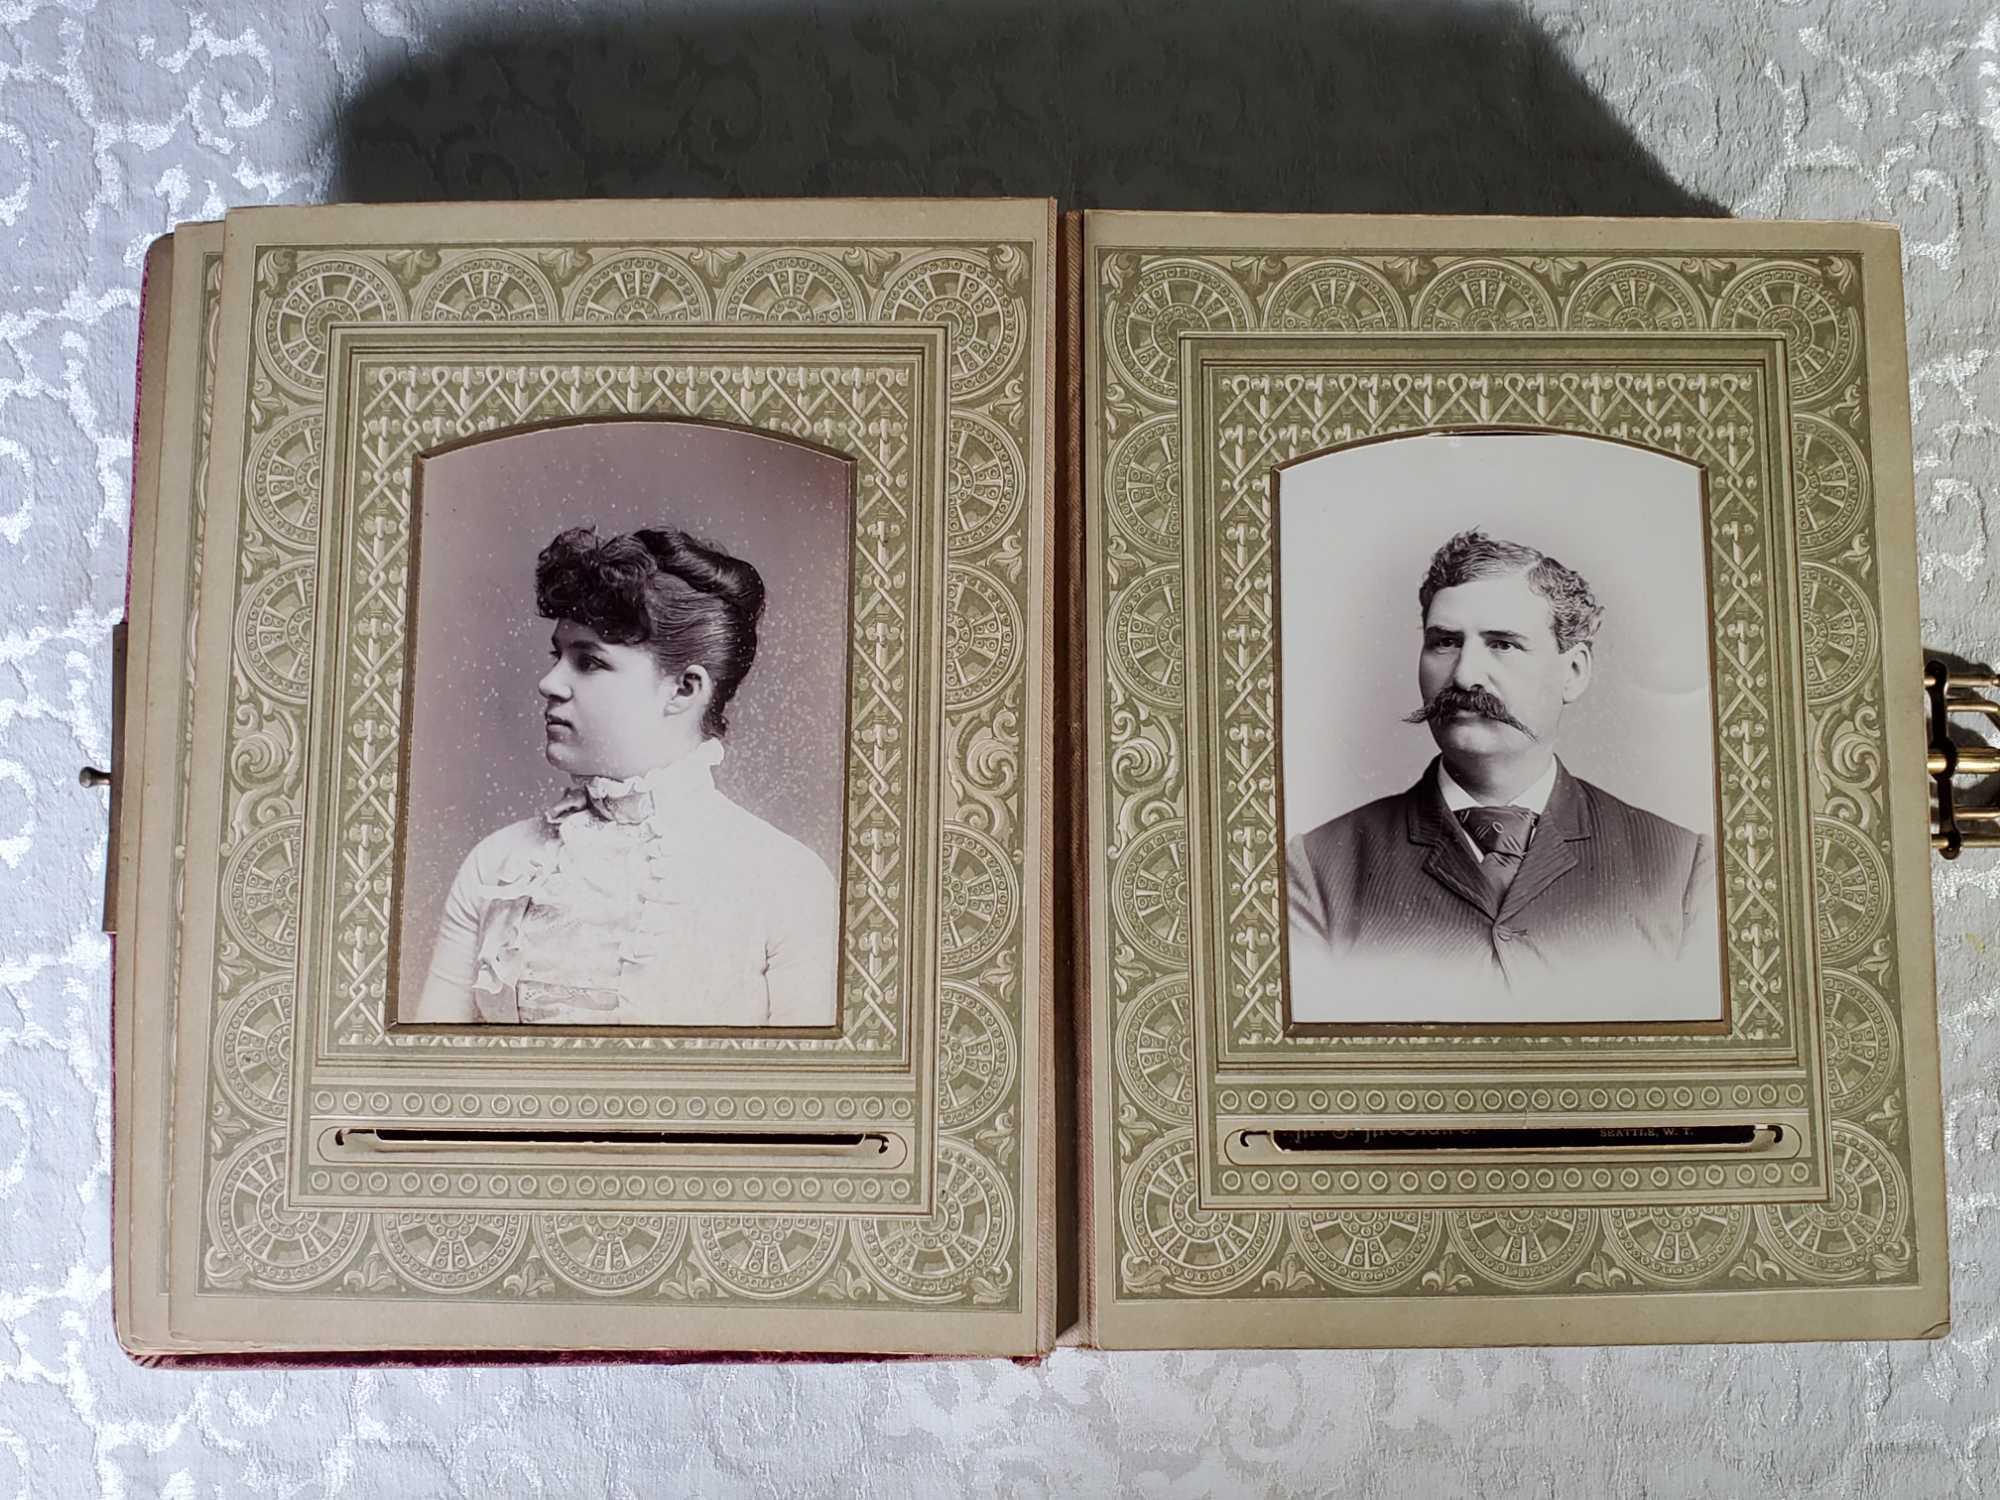 Lot Of Great Vintage Photos Cabinet Cards, Cartes des Visites, Victorian Album, And Tool Box